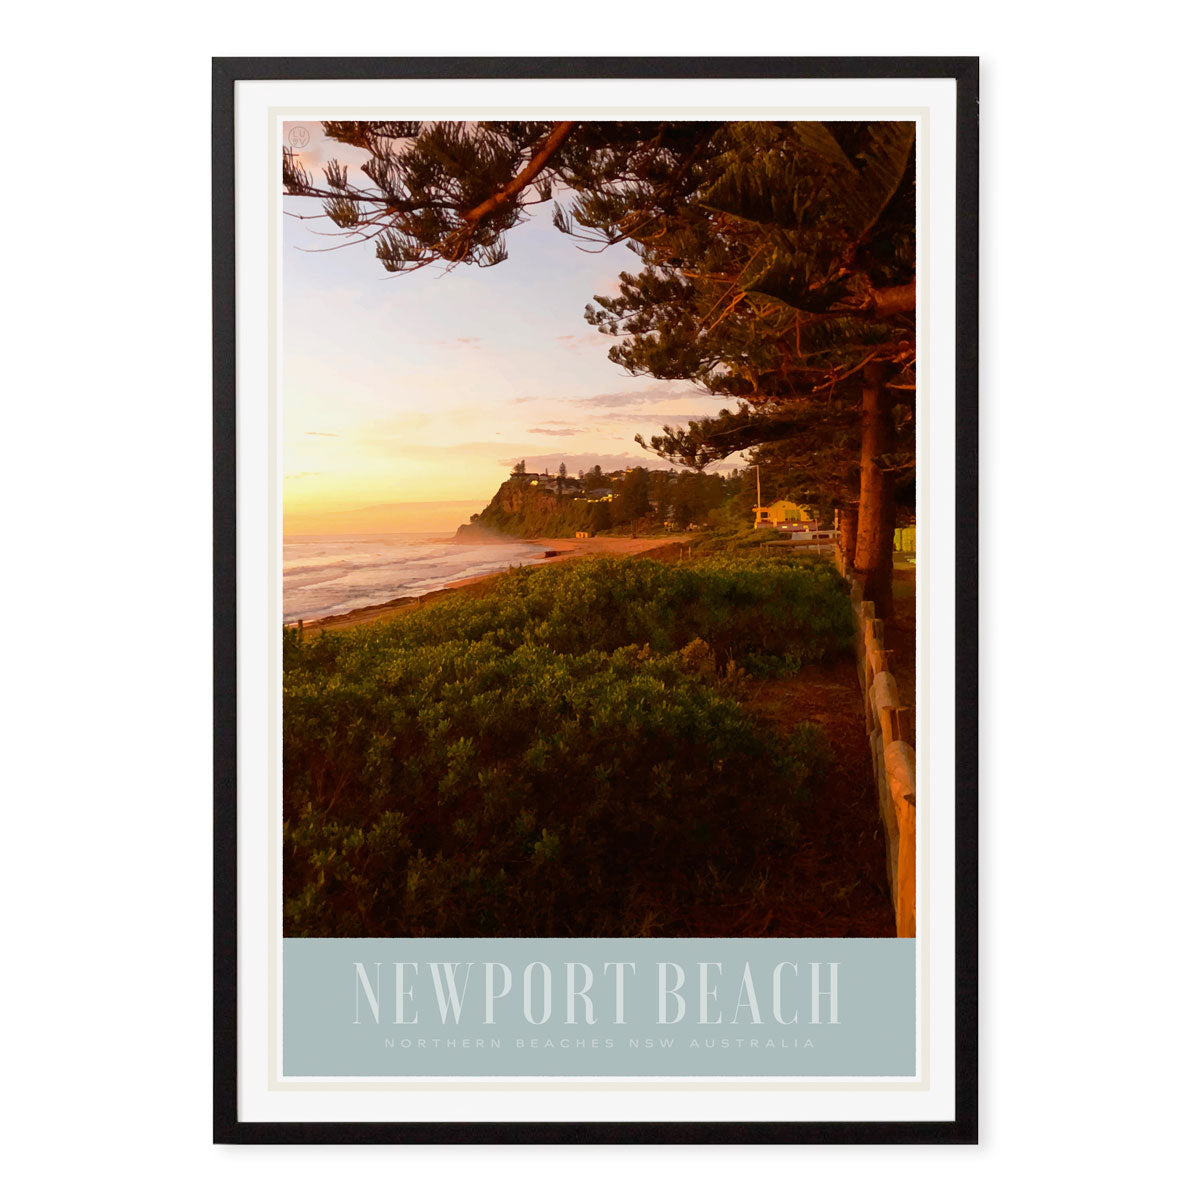 Newport beach retro vintage poster print in black frame from places we luv